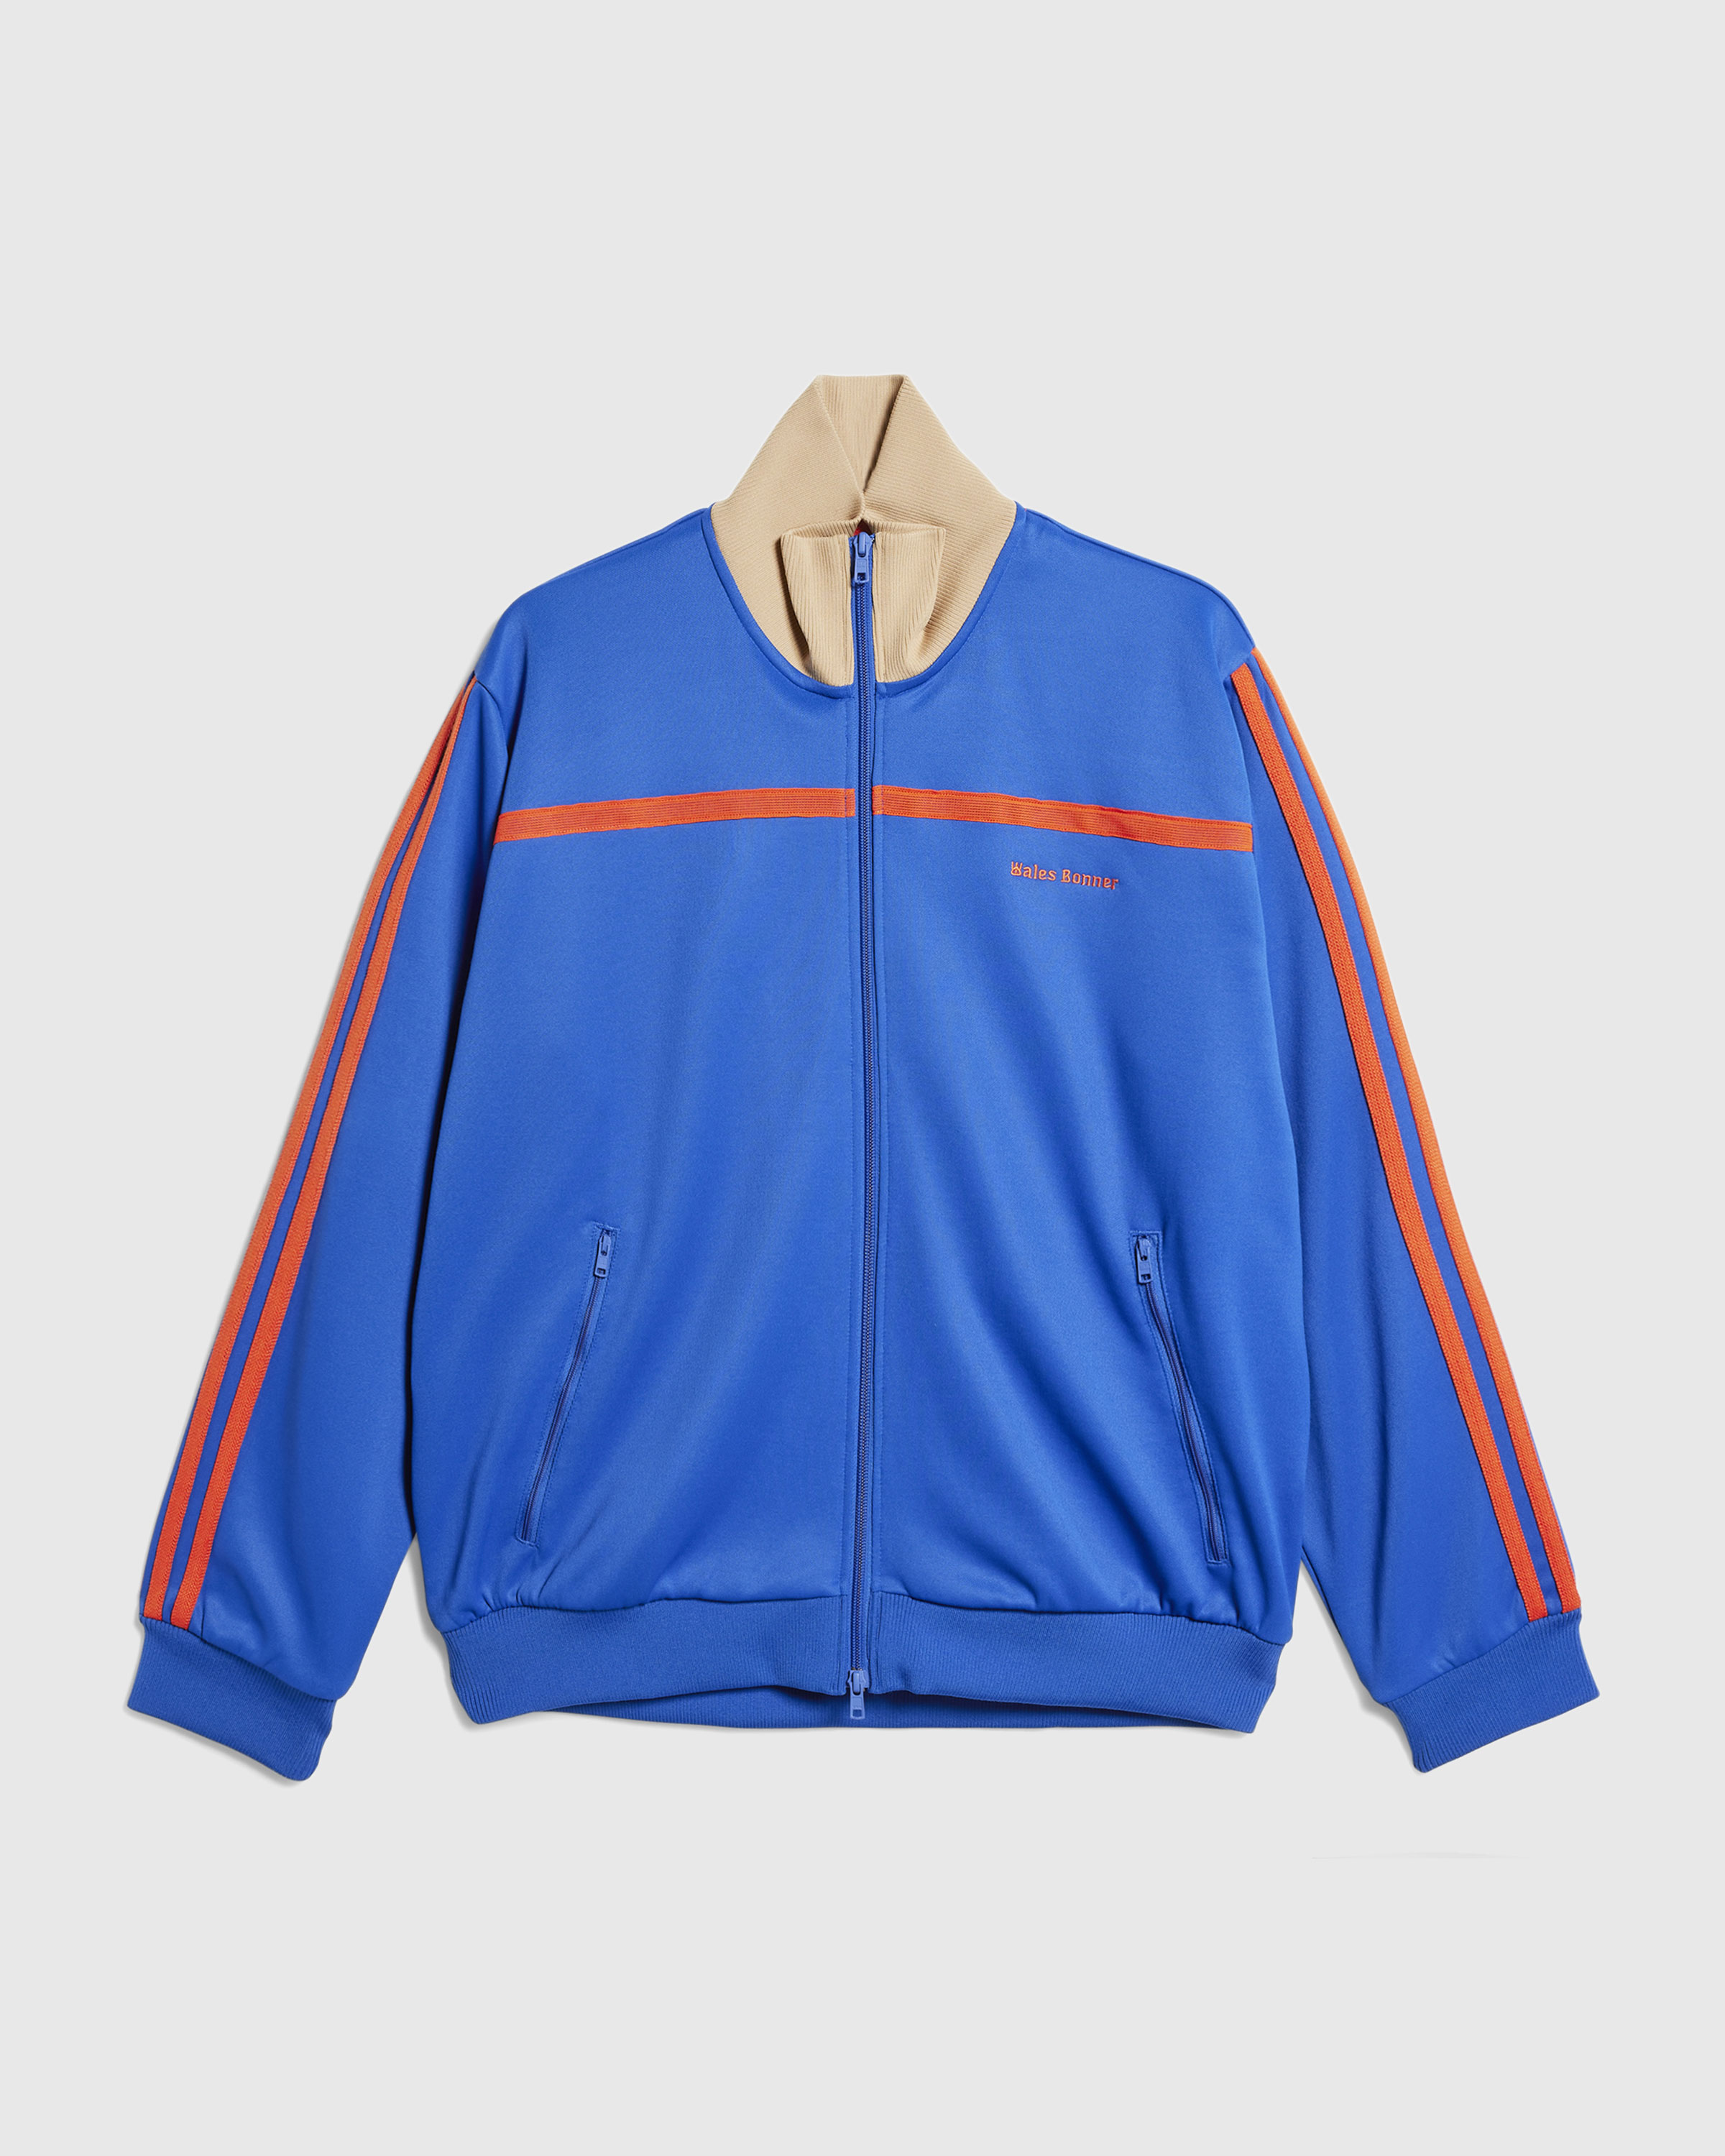 Adidas x Wales Bonner – Jersey Track Top Royal Blue - Track Jackets - Blue - Image 1